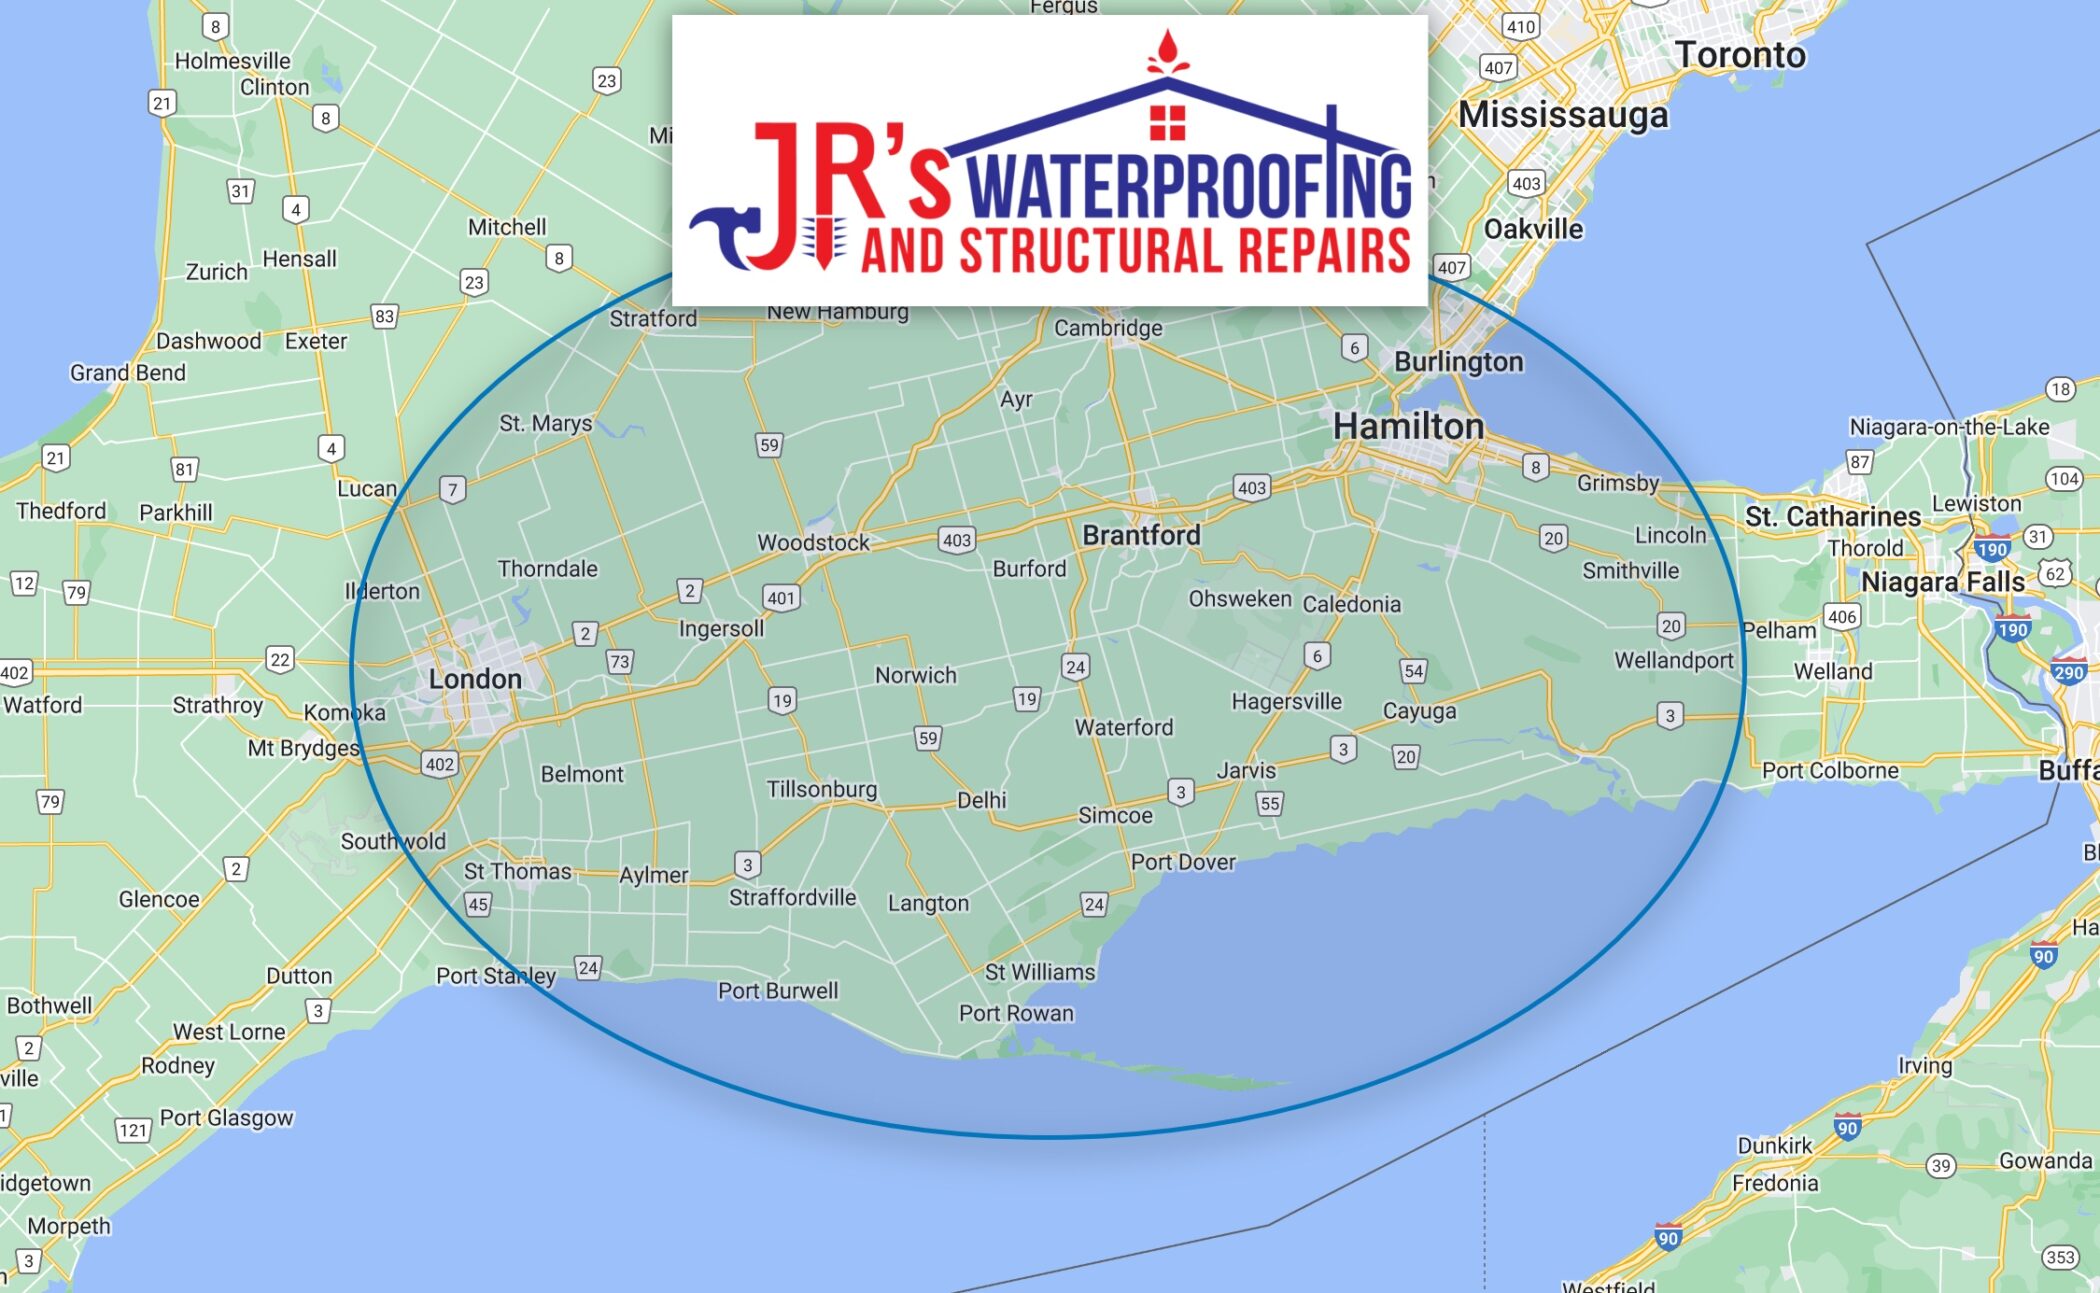 JR's Waterproofing and Structural Repair Service Area on a Map